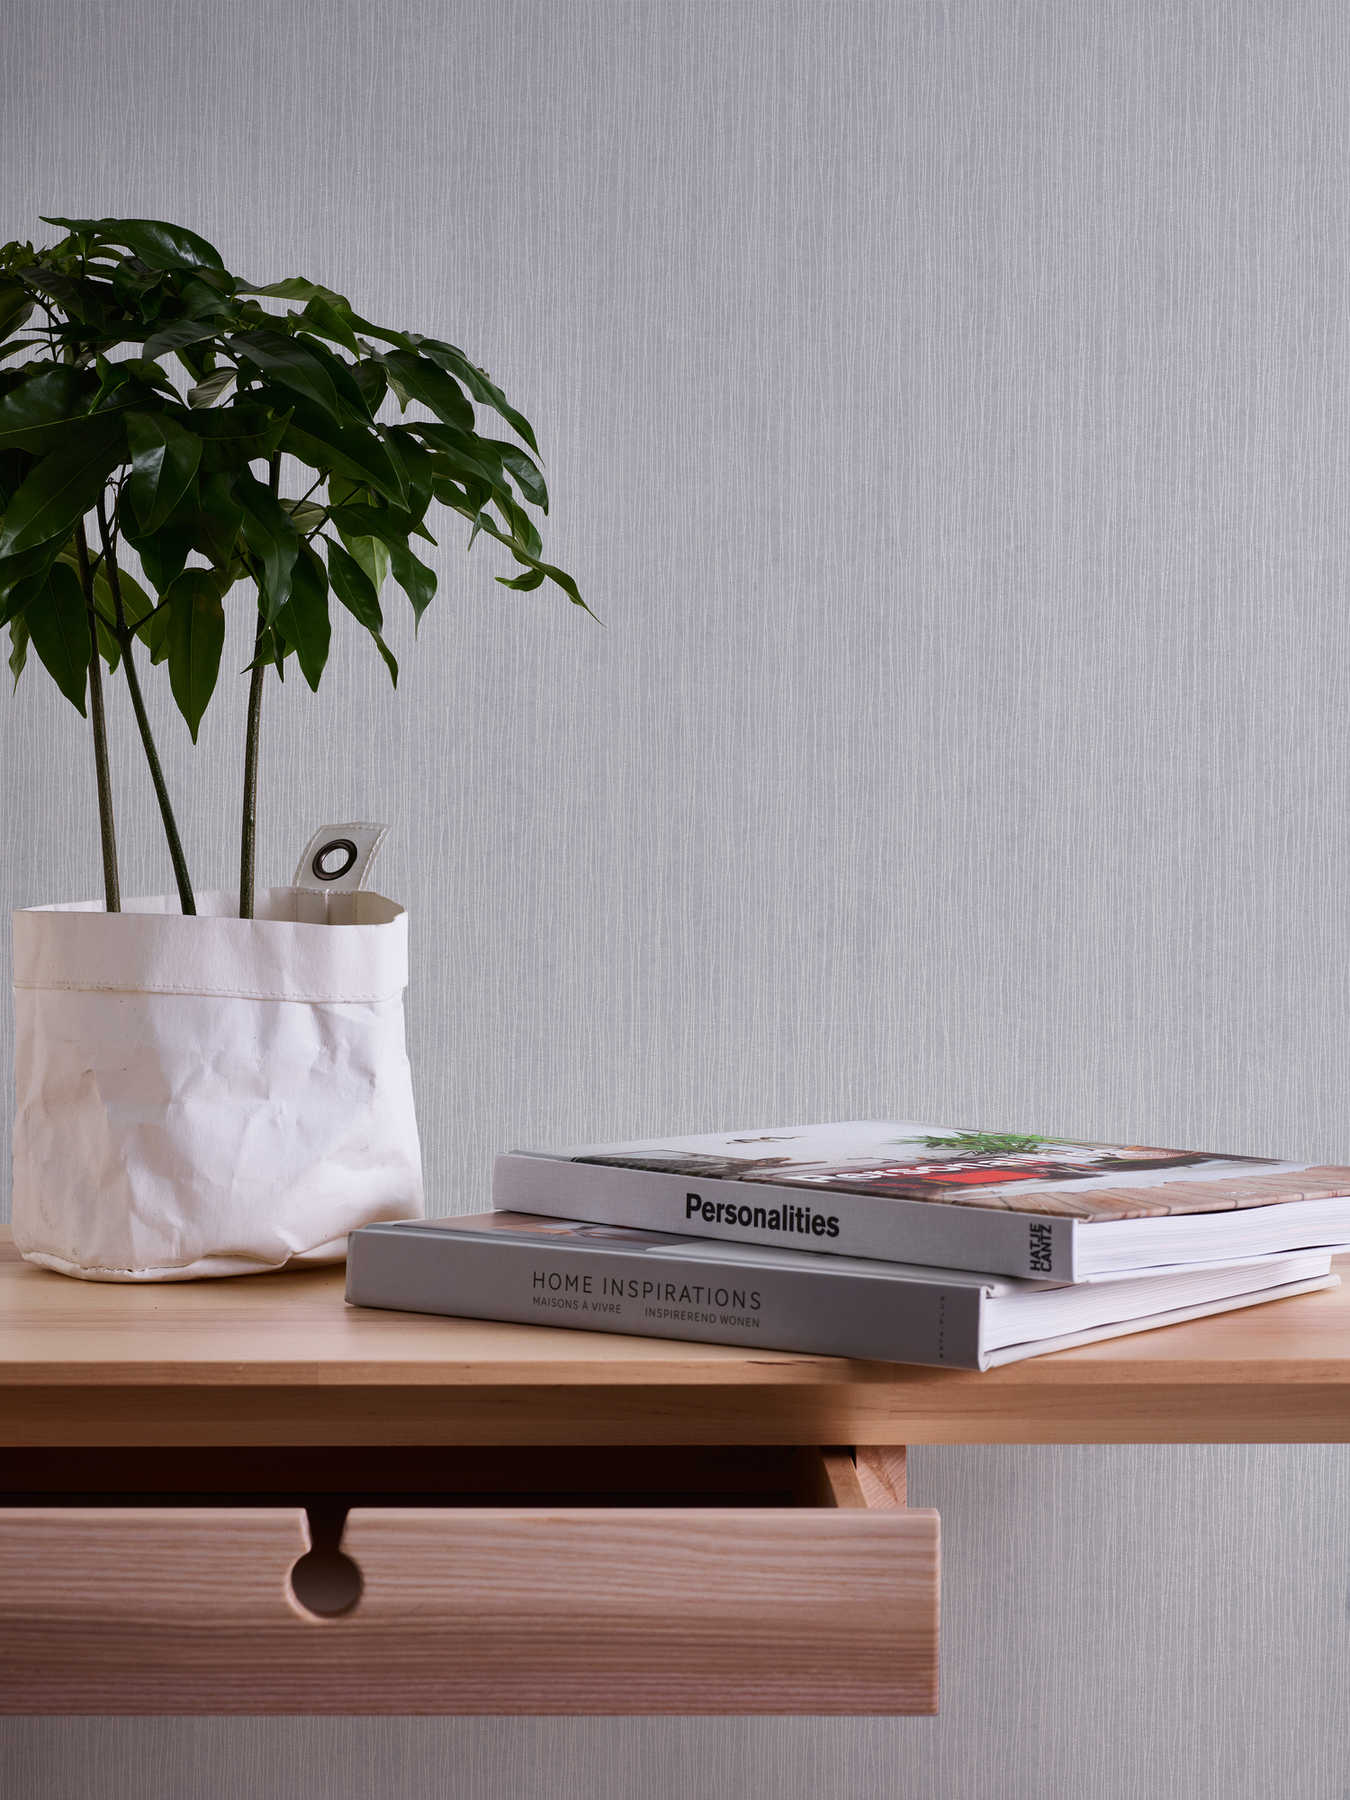             Paintable wallpaper non-woven with nature structure design
        